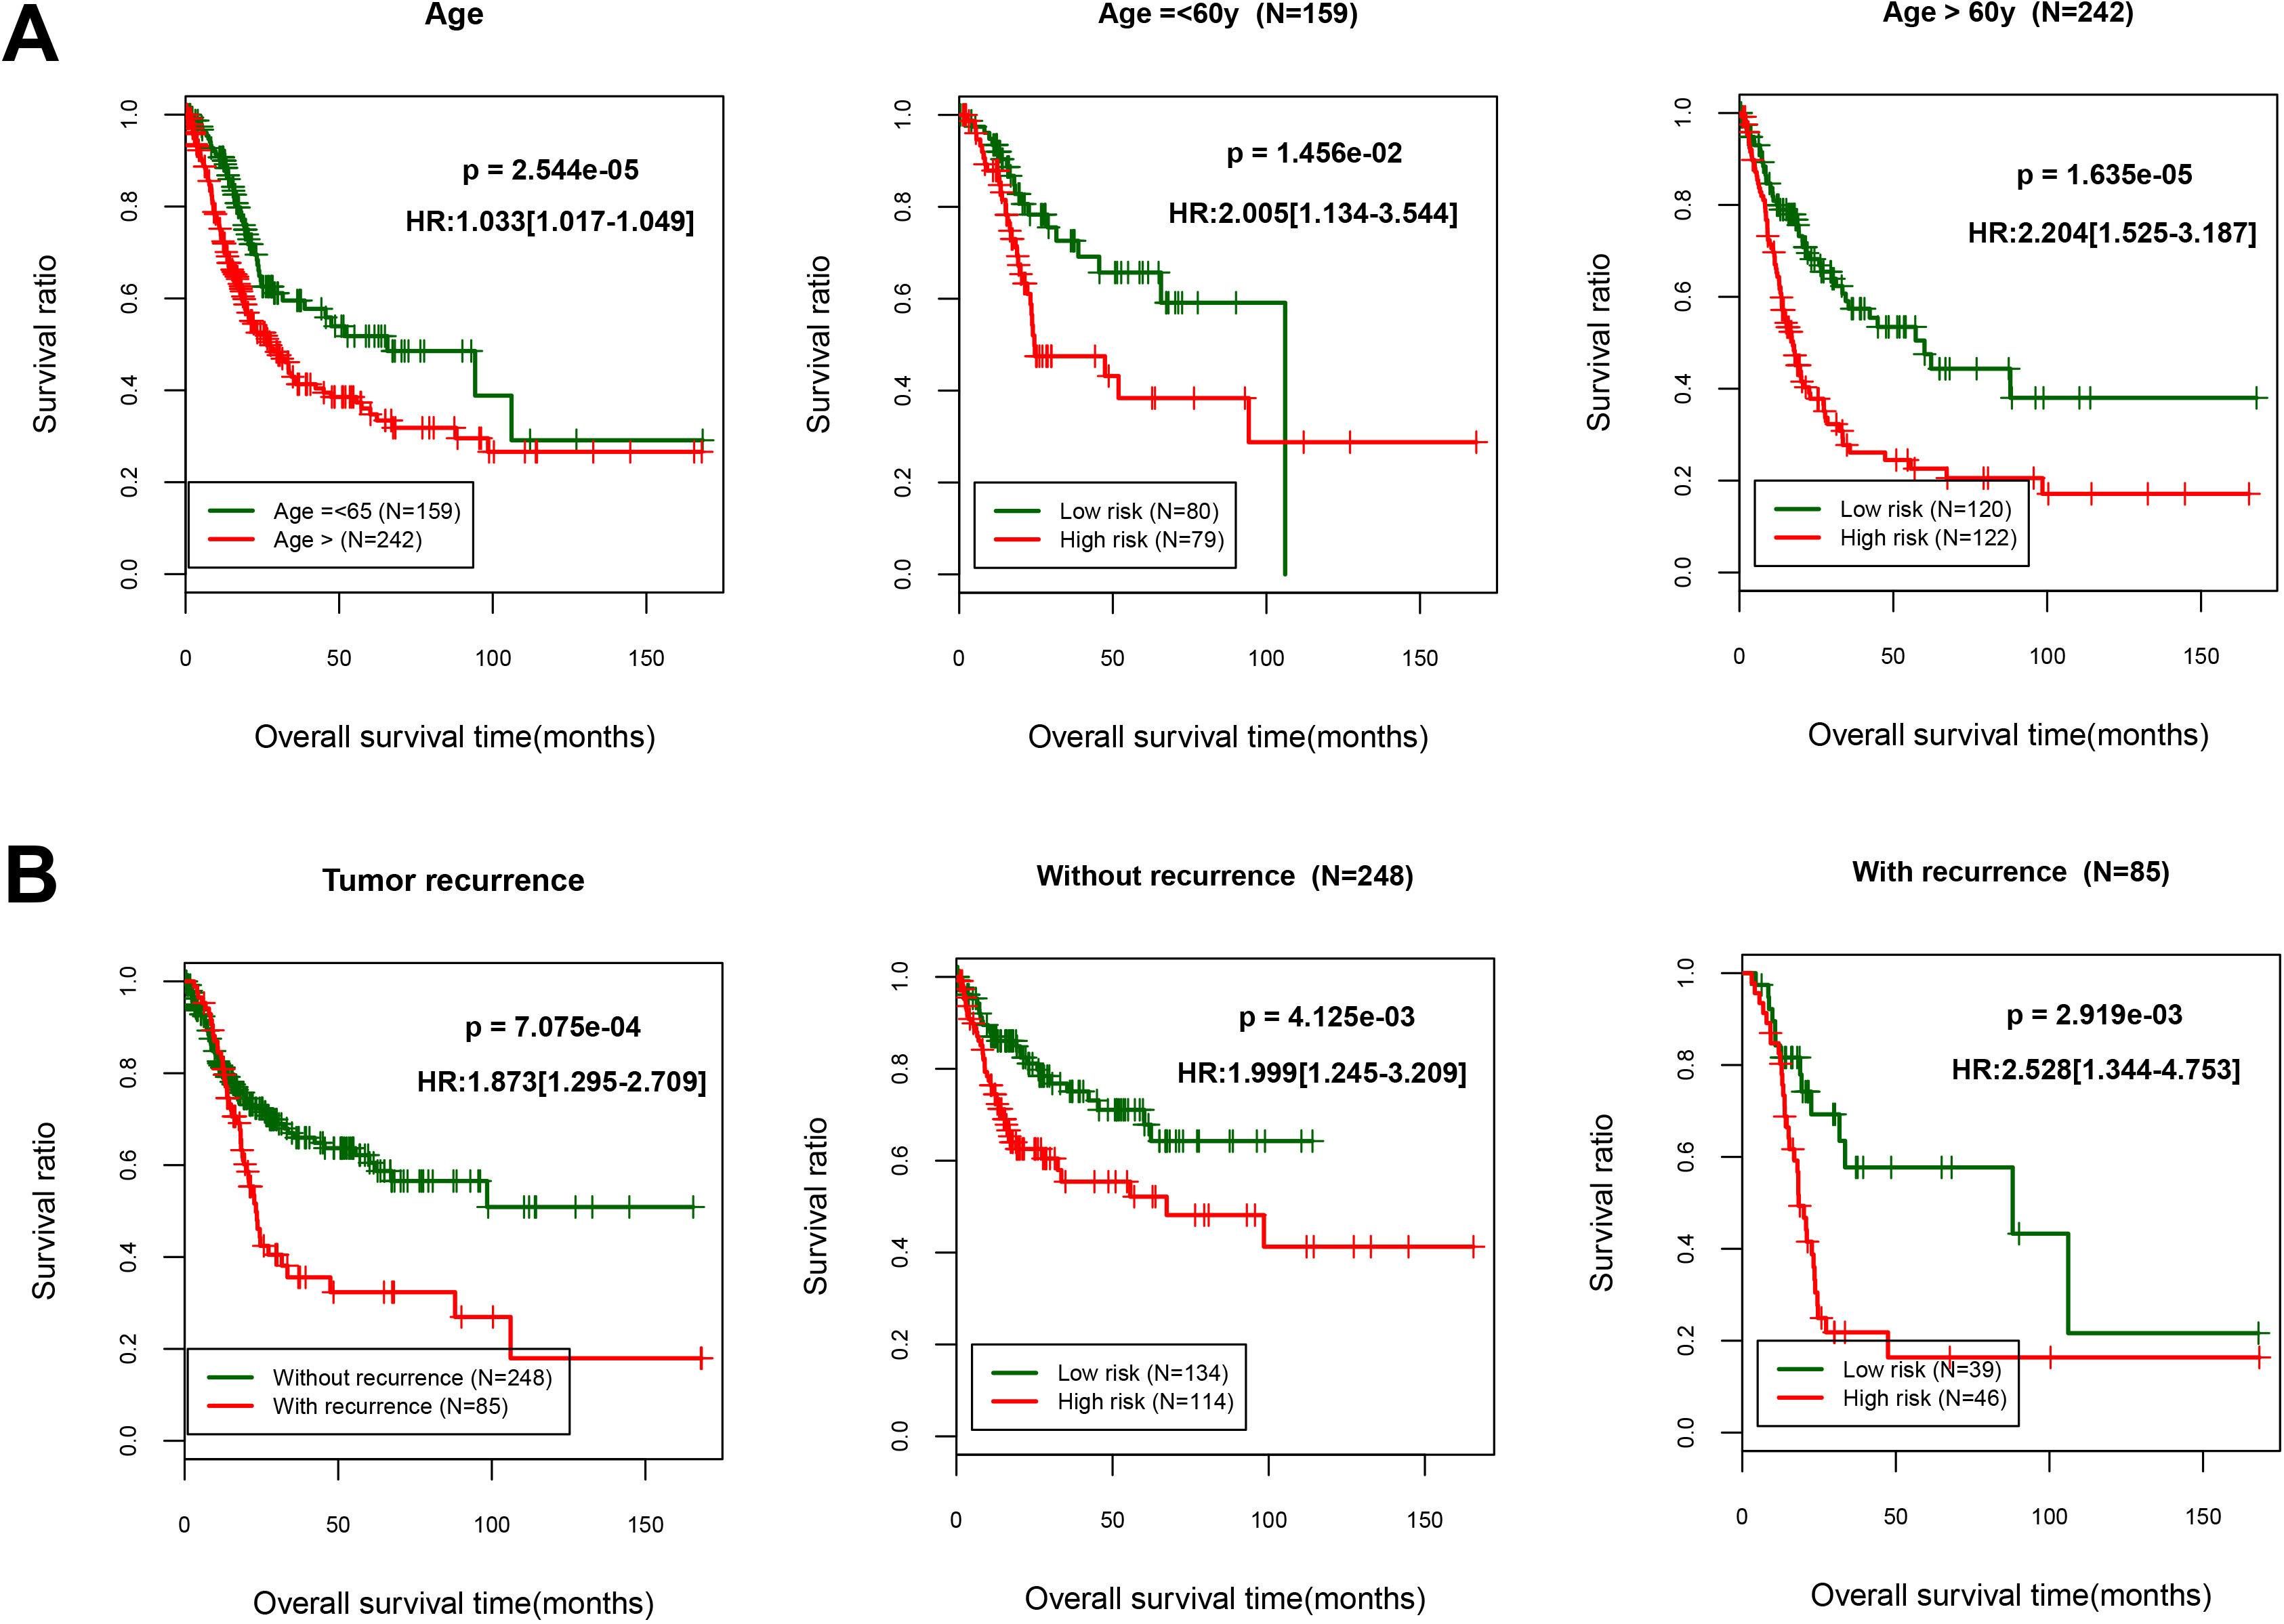 Overall survival was evaluated using Kaplan-Meier curves in line with age and recurrence-tiered low-risk and high-risk scores. (A) Age, age ⩾ 60 years, n= 159, age > 60 years, n= 242; (B) Tumor recurrence, without recurrence, n= 248, with recurrence, n= 85.